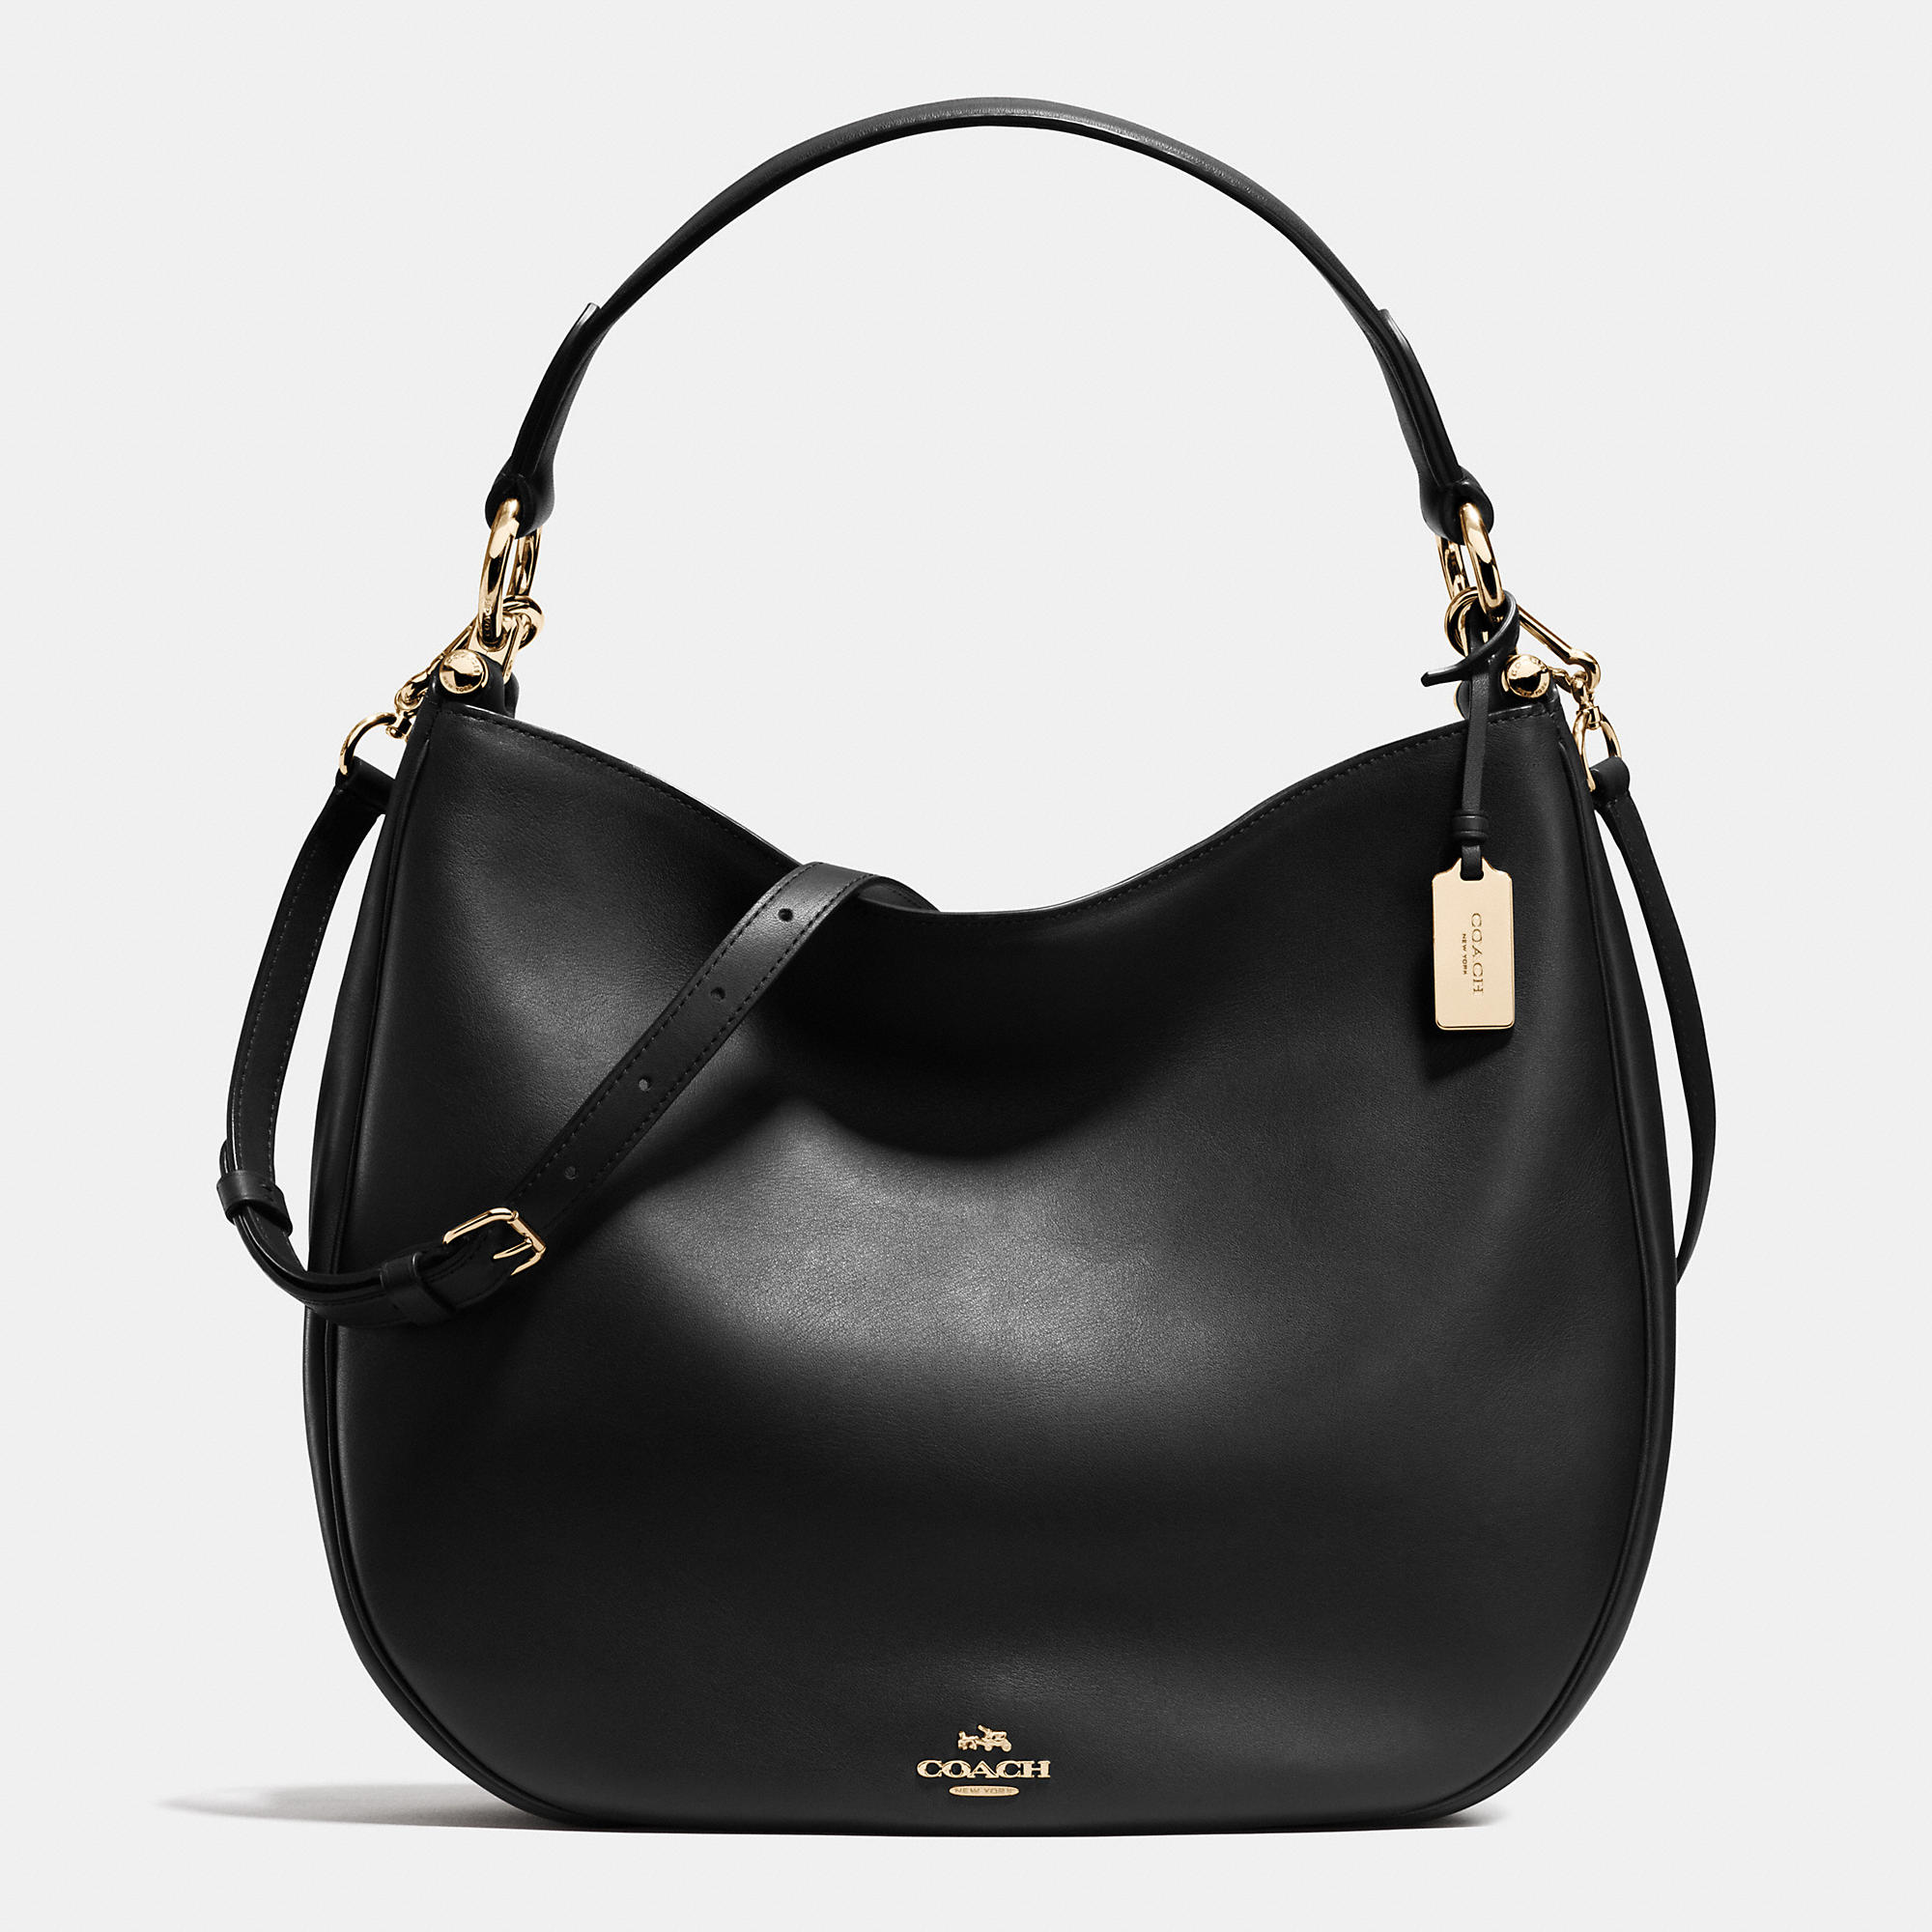 Luxury Brand Coach Nomad Hobo In Glovetanned Leather